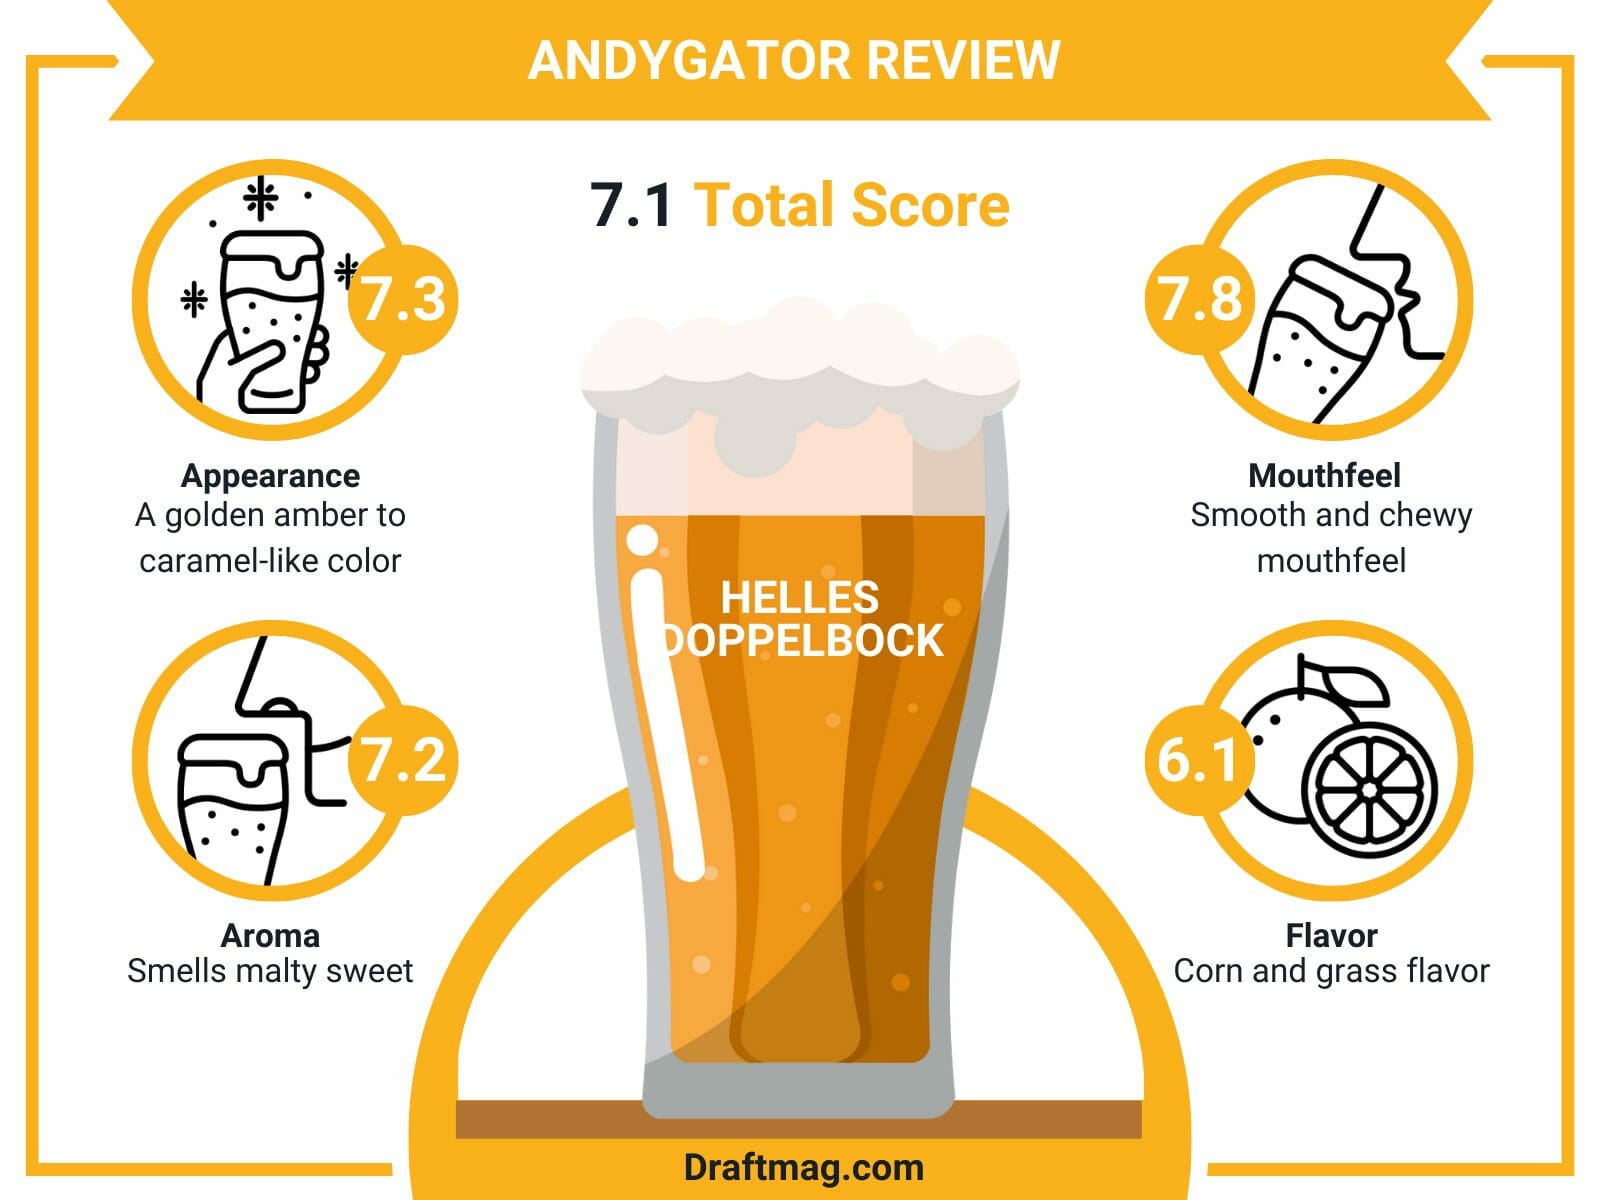 Andygator review infographic